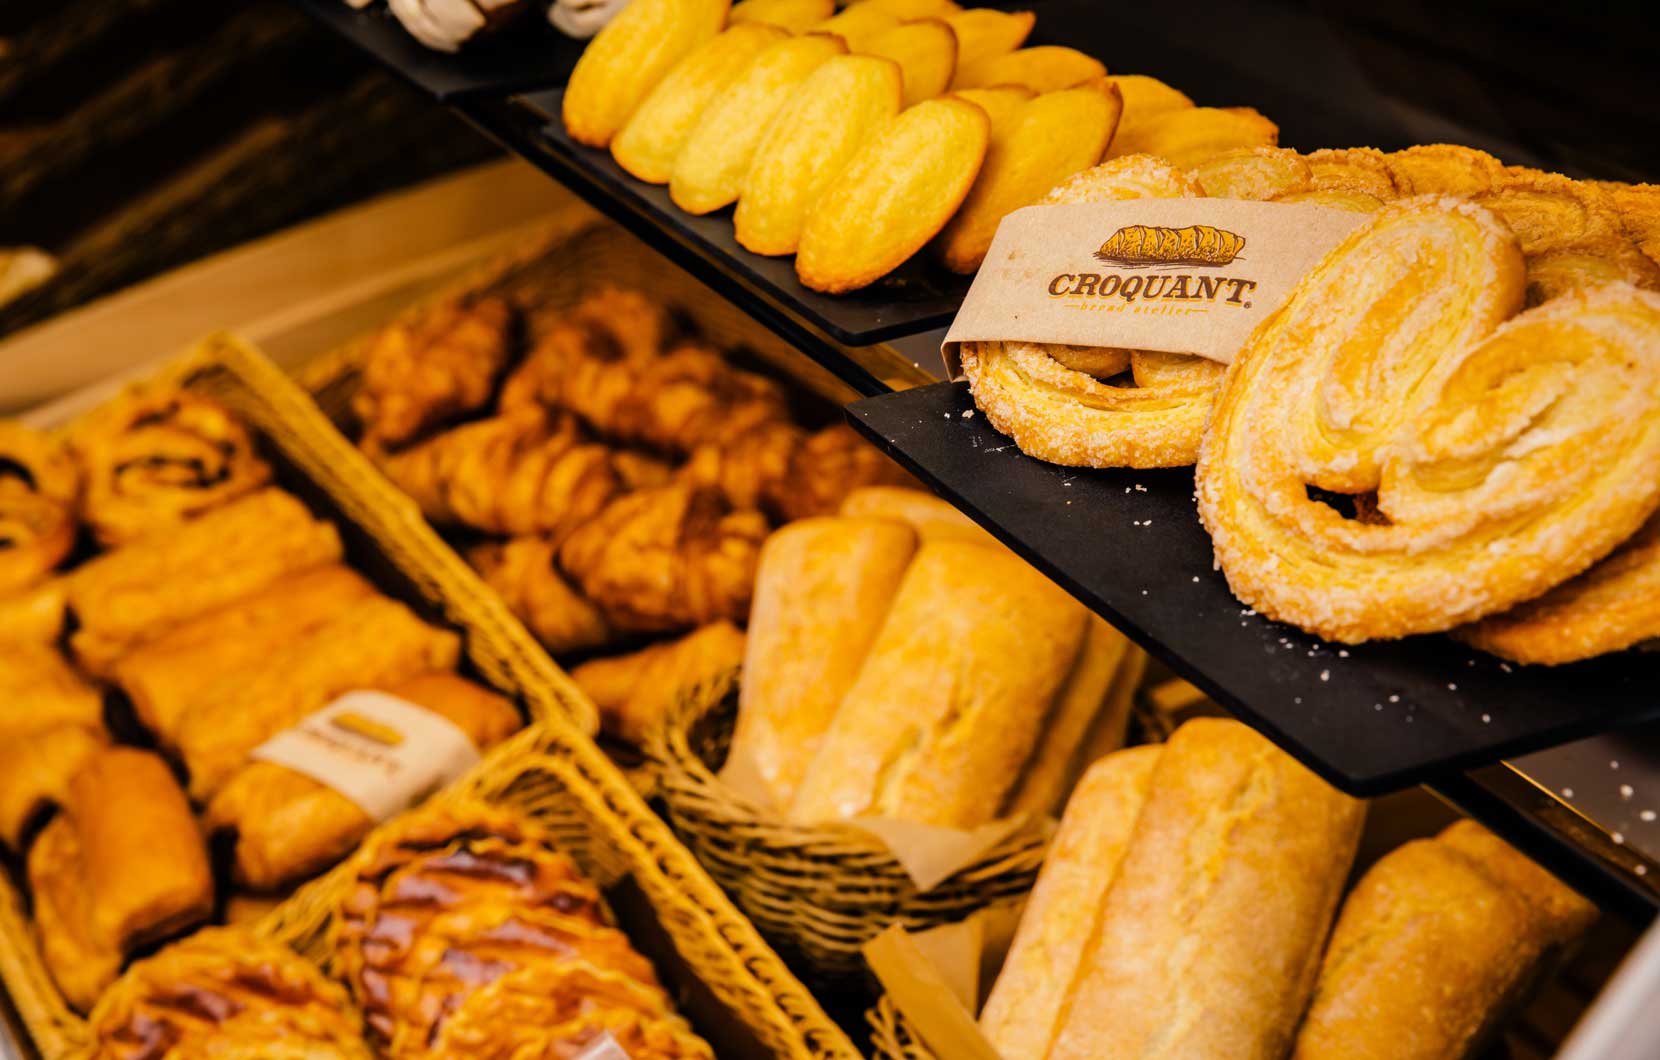 Don't miss out on the freshly baked goods from Croquant.